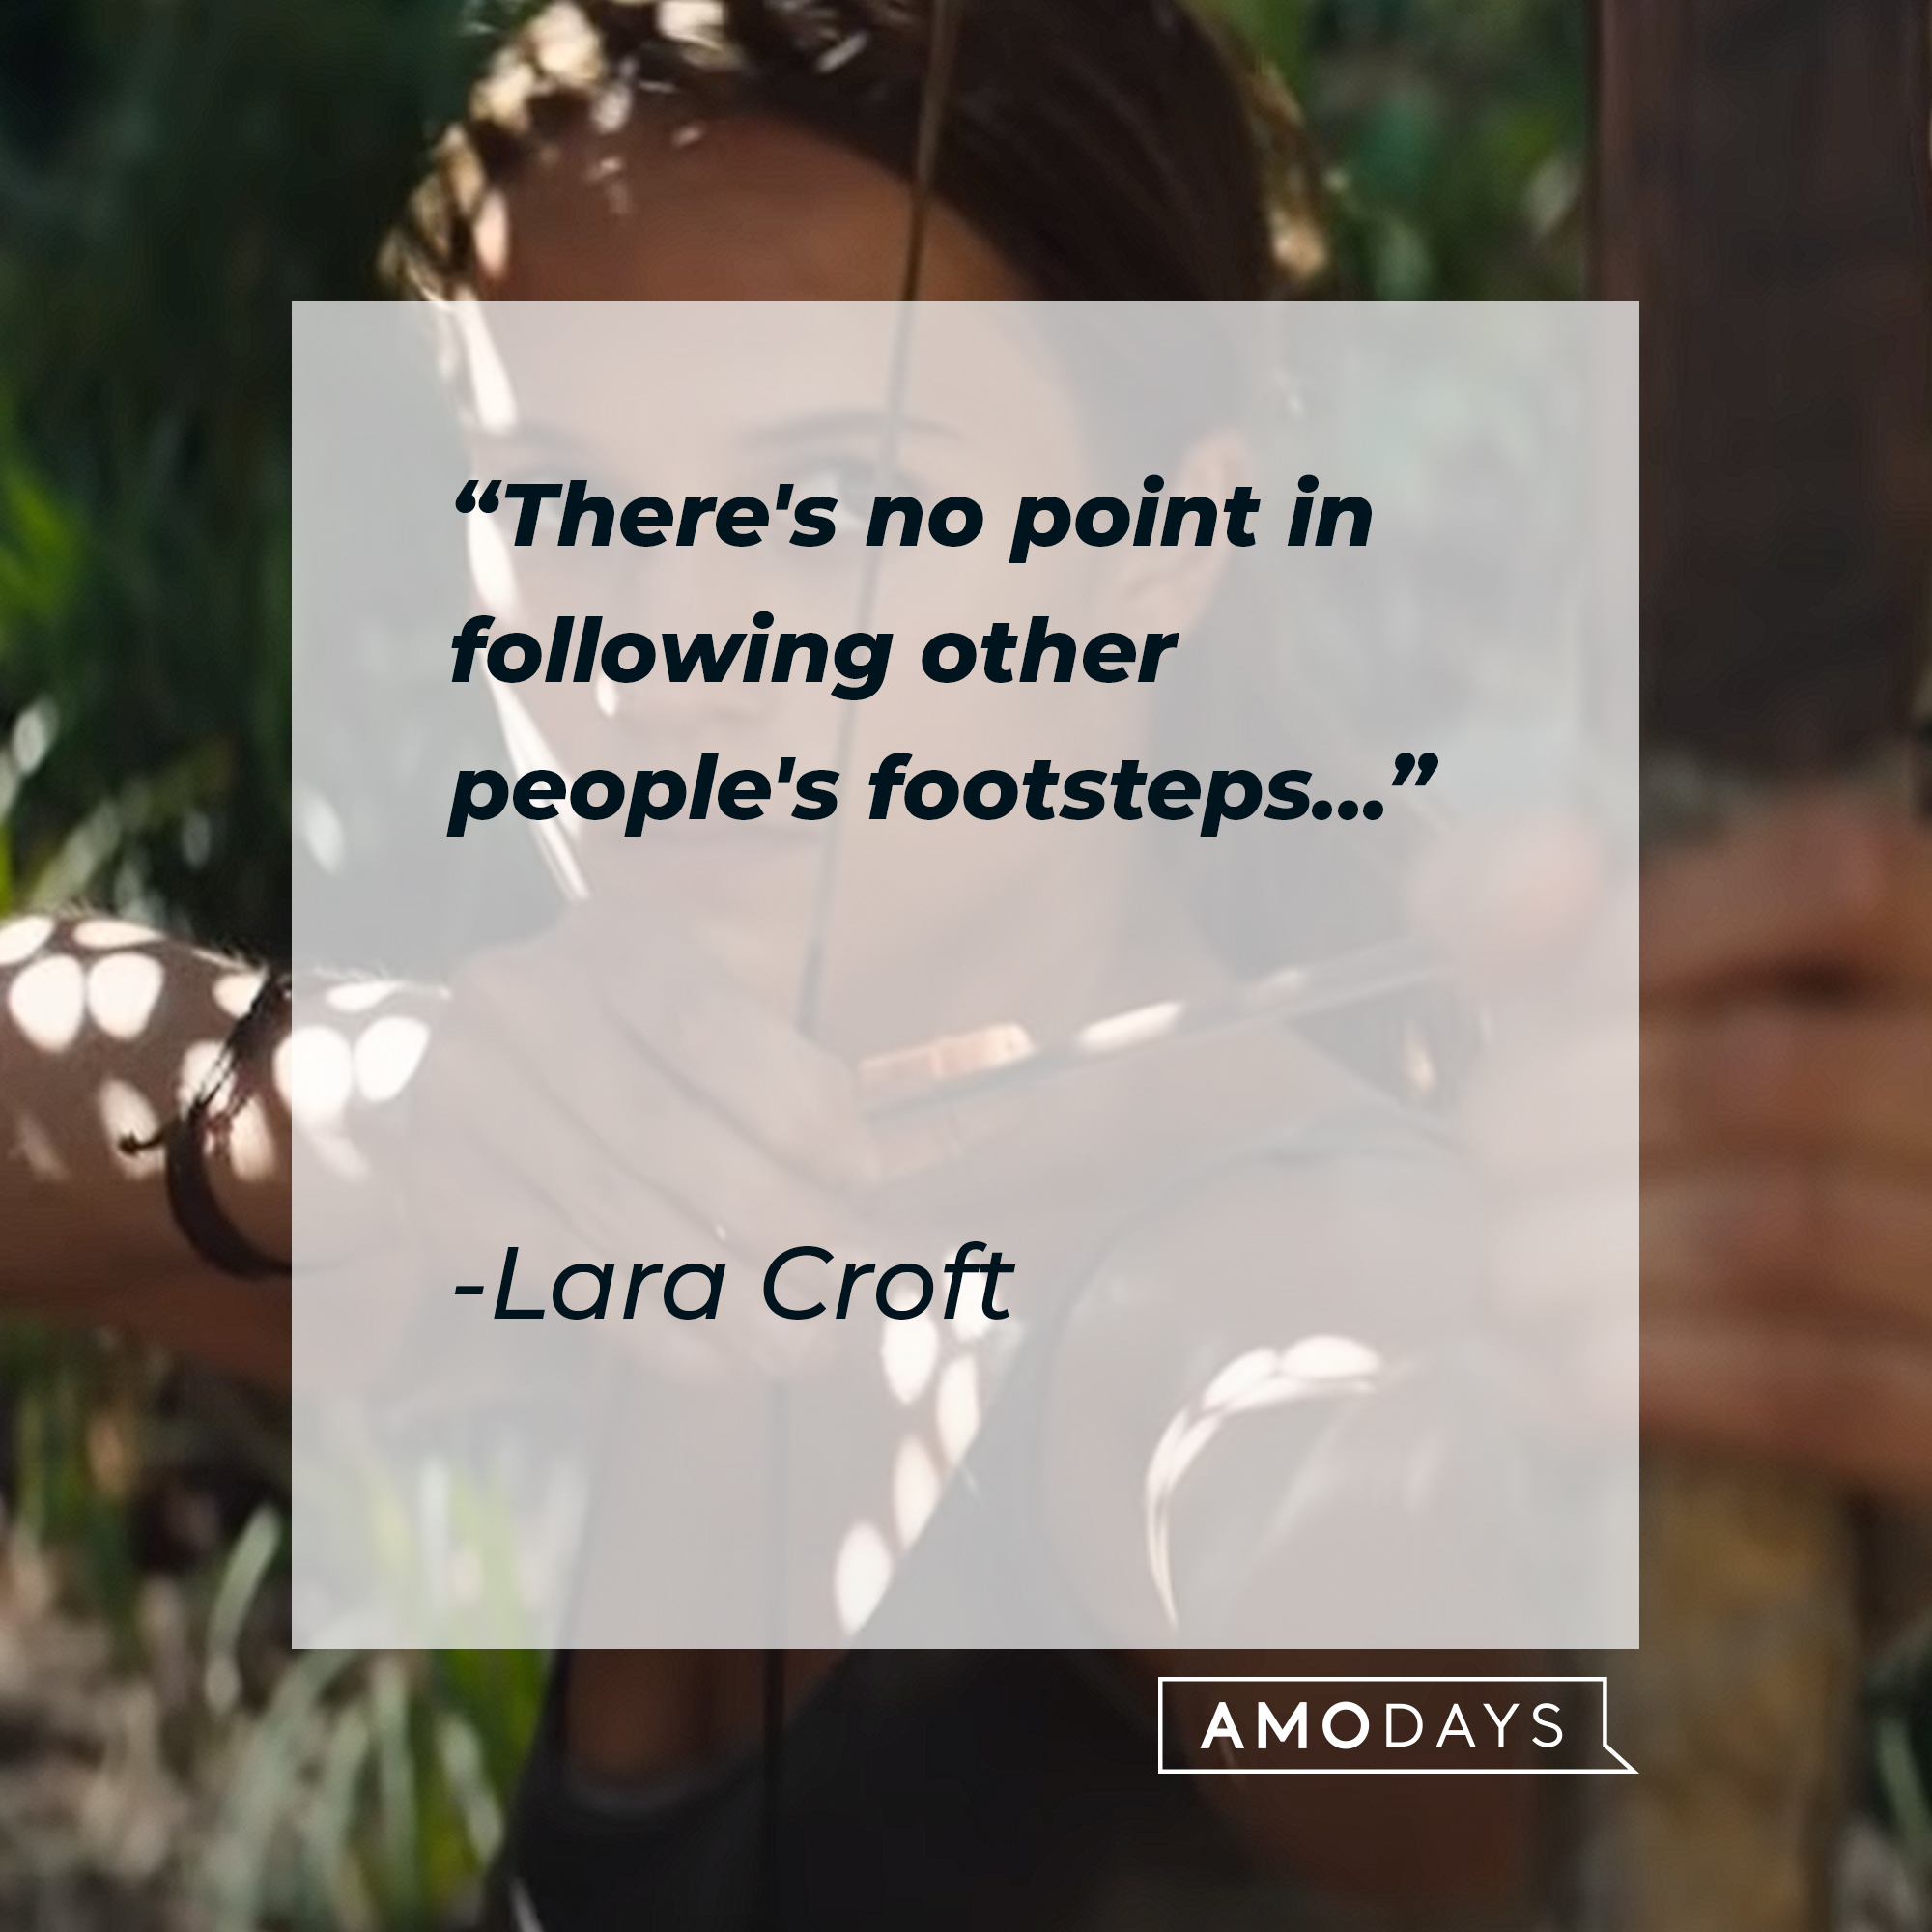 An image of  the Lara Croft played by Alicia Vikander, with the Lara Croft quote: “There's no point in following other people's footsteps…” | Source: youtube.com/WarnerBrosPictures